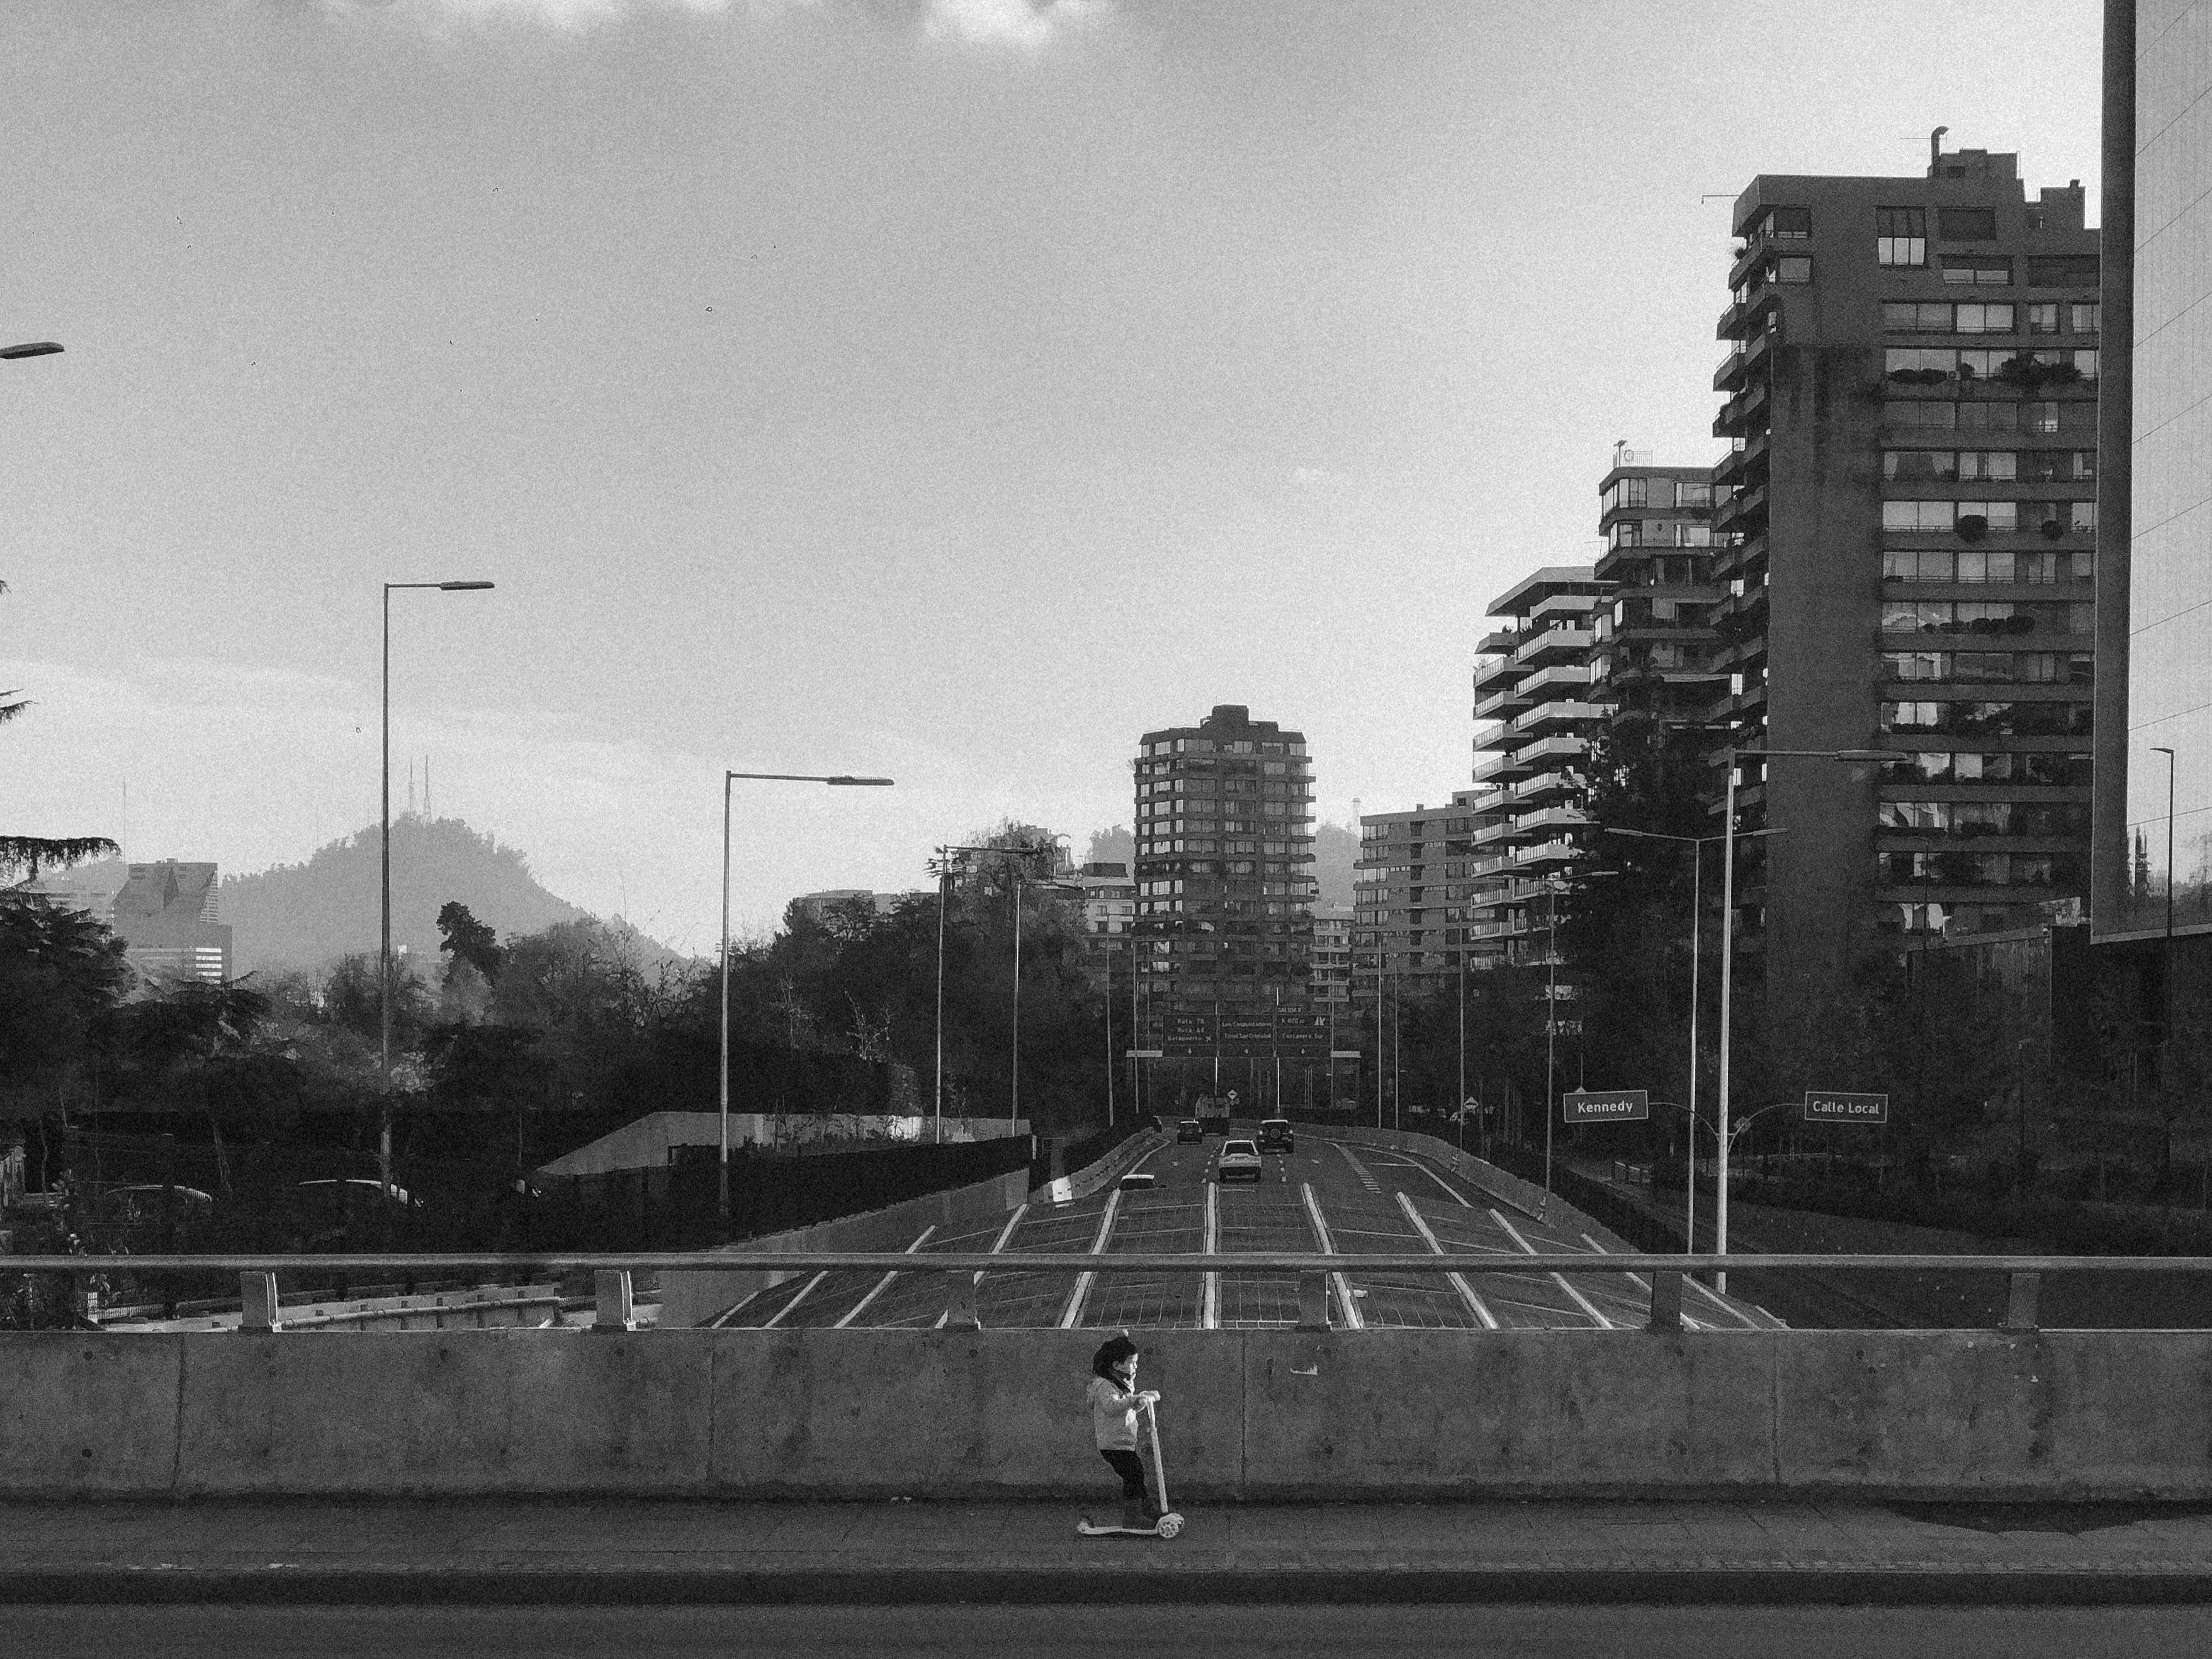 Black and white picture of a small child riding a miniature scooter, alone, through a massive highway. Noisy, low-contrast image.